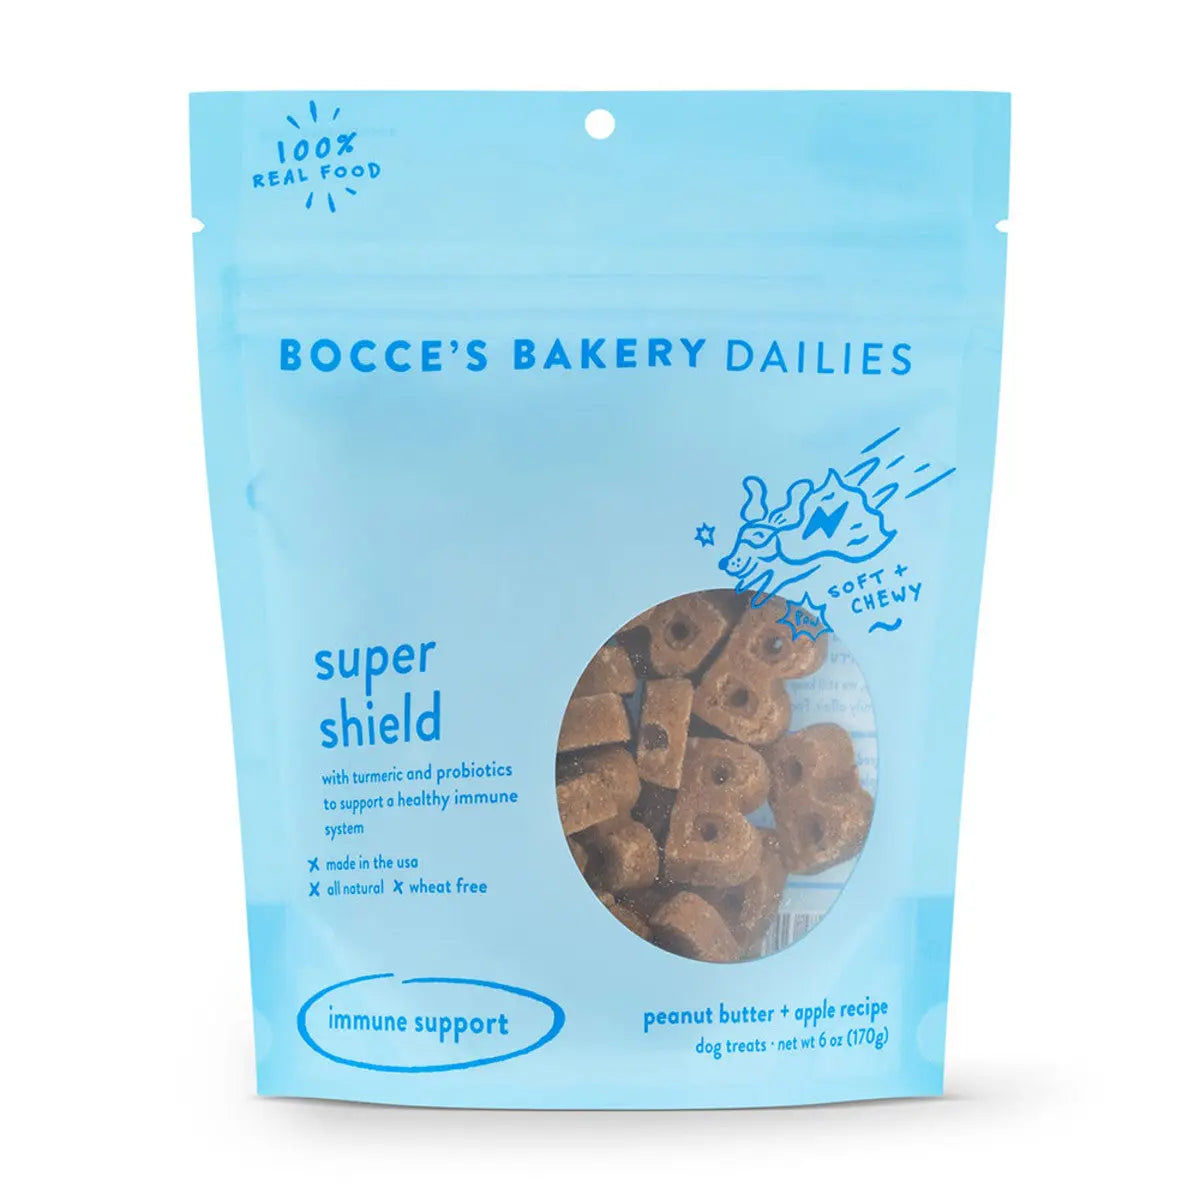 Bocce's Bakery Dailies Super Shield 6oz Soft & Chewy Dog Treats Bocce's Bakery